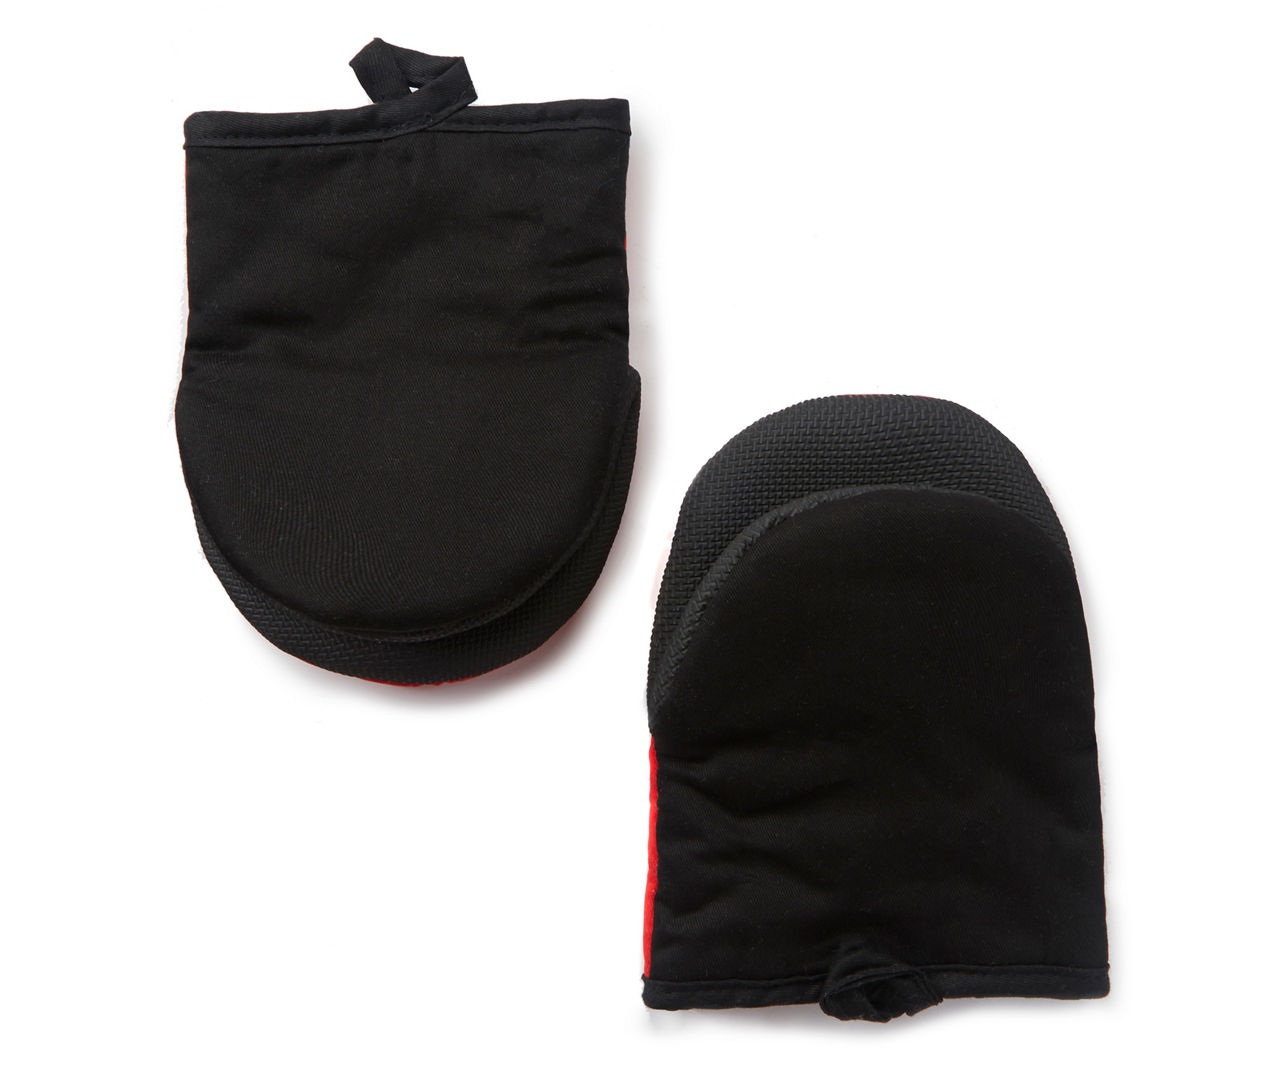 Disney Mickey & Minnie Mouse Mini Oven Mitts, 2-Pack